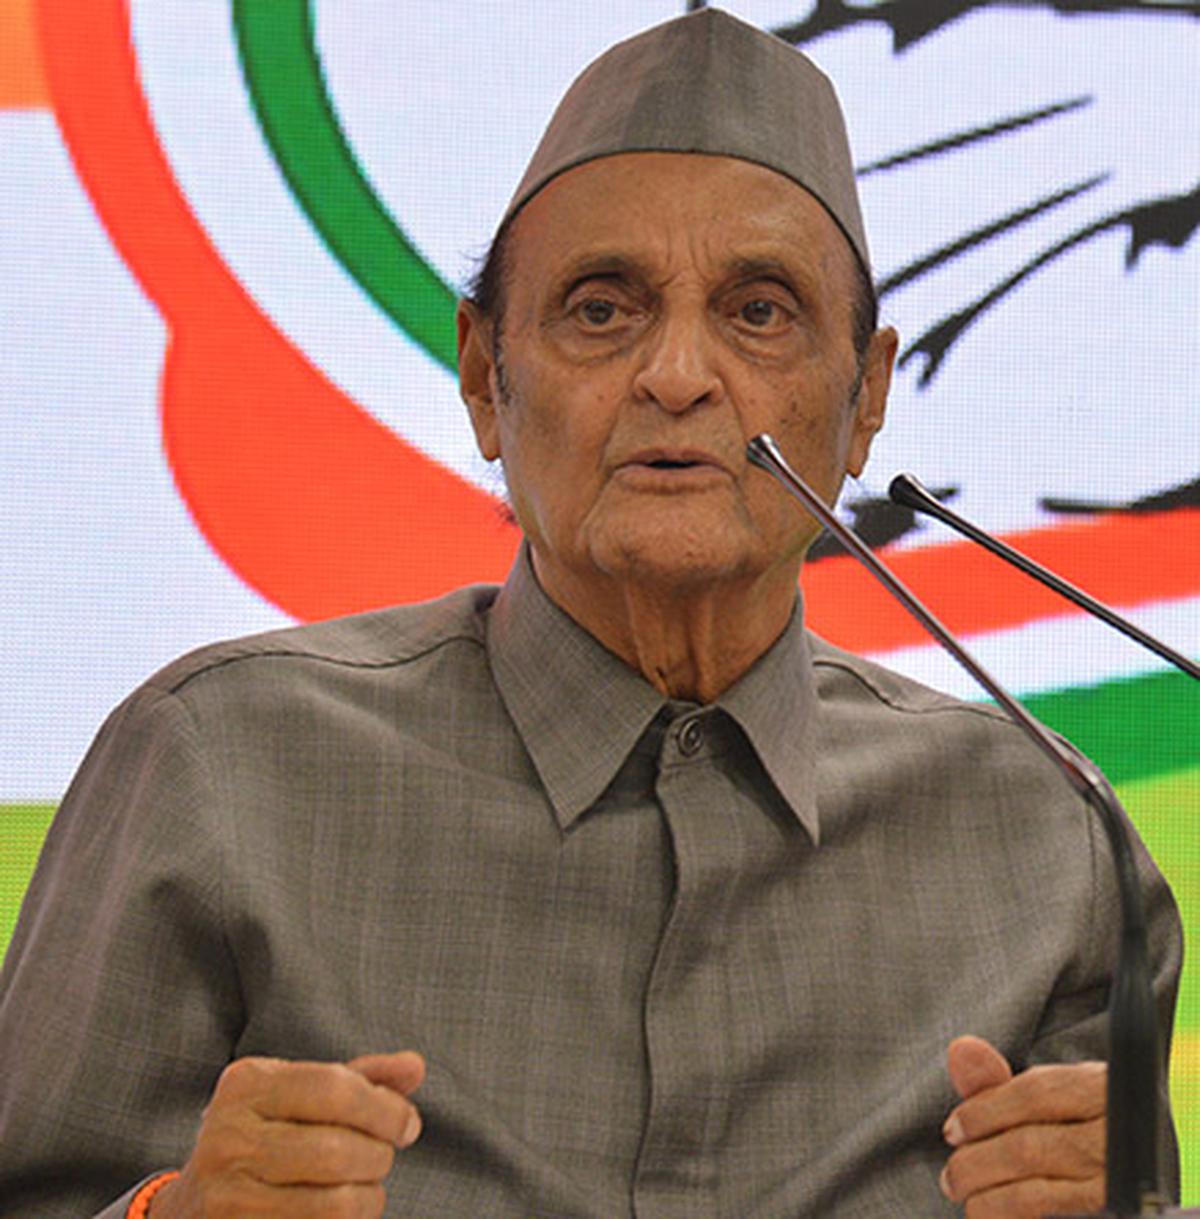 To say Rajaraja is not a Hindu is akin to saying a Catholic is not a Christian, says Karan Singh